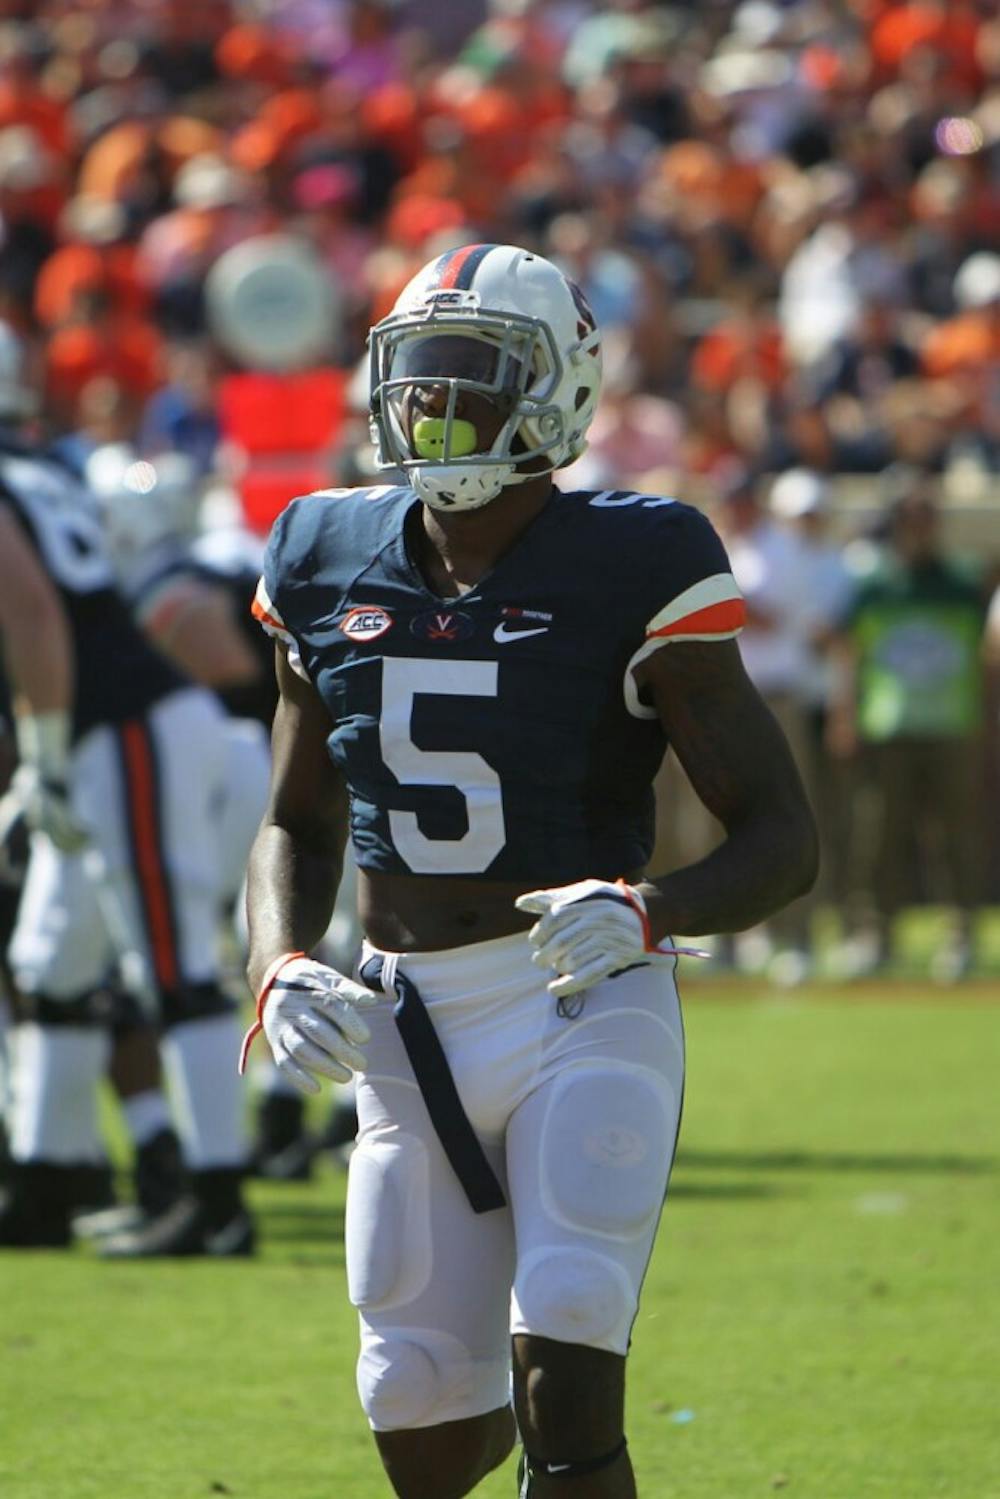 <p>Senior wide receiver Doni Dowling recorded four touchdowns and had over 10 yards per reception in each game in Virginia's four-game winning streak.&nbsp;</p>